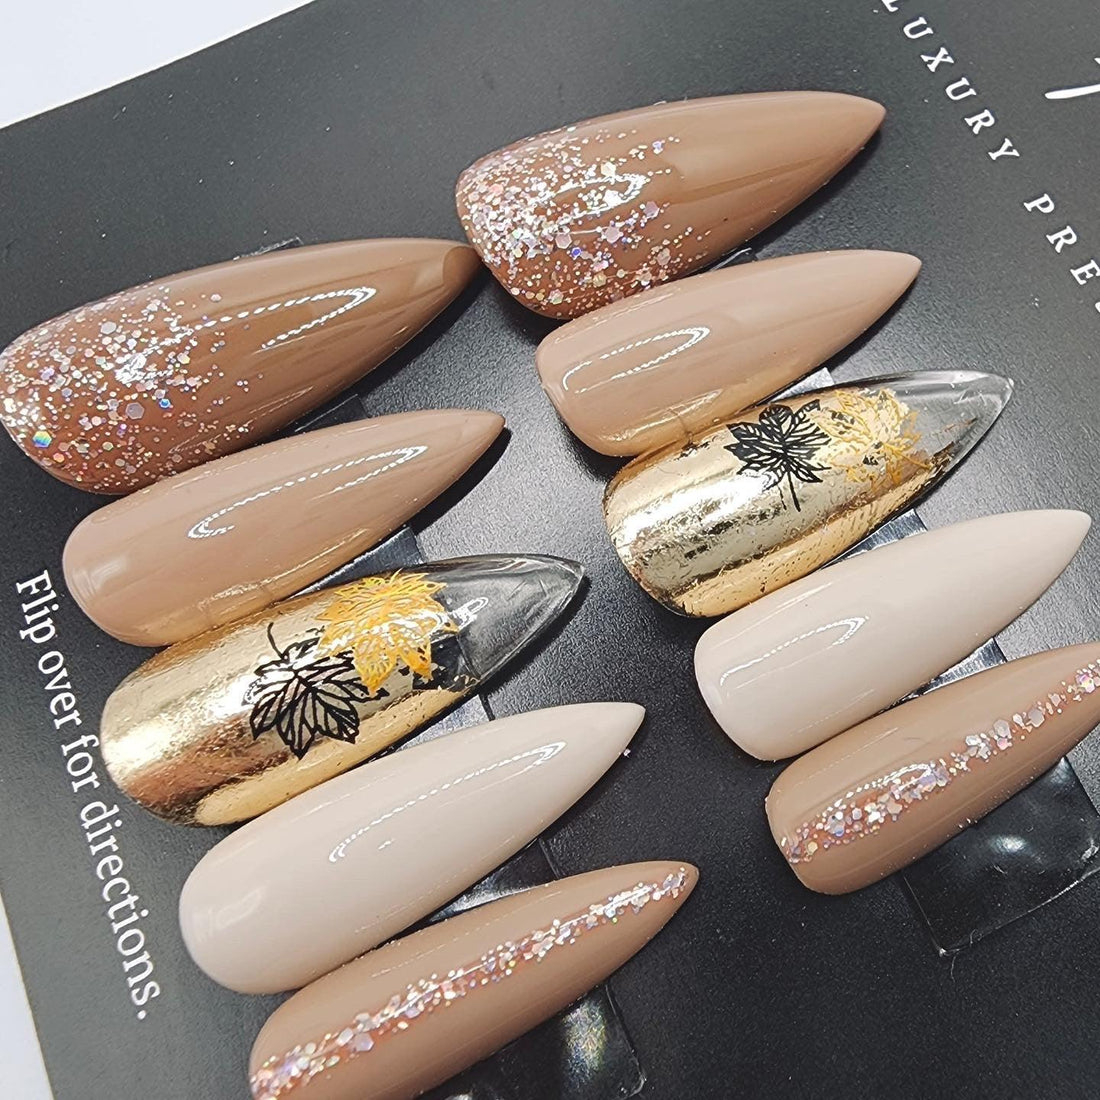 Fall leaves, gold foil, nude colors and glitter. Perfect press on nails for fall.